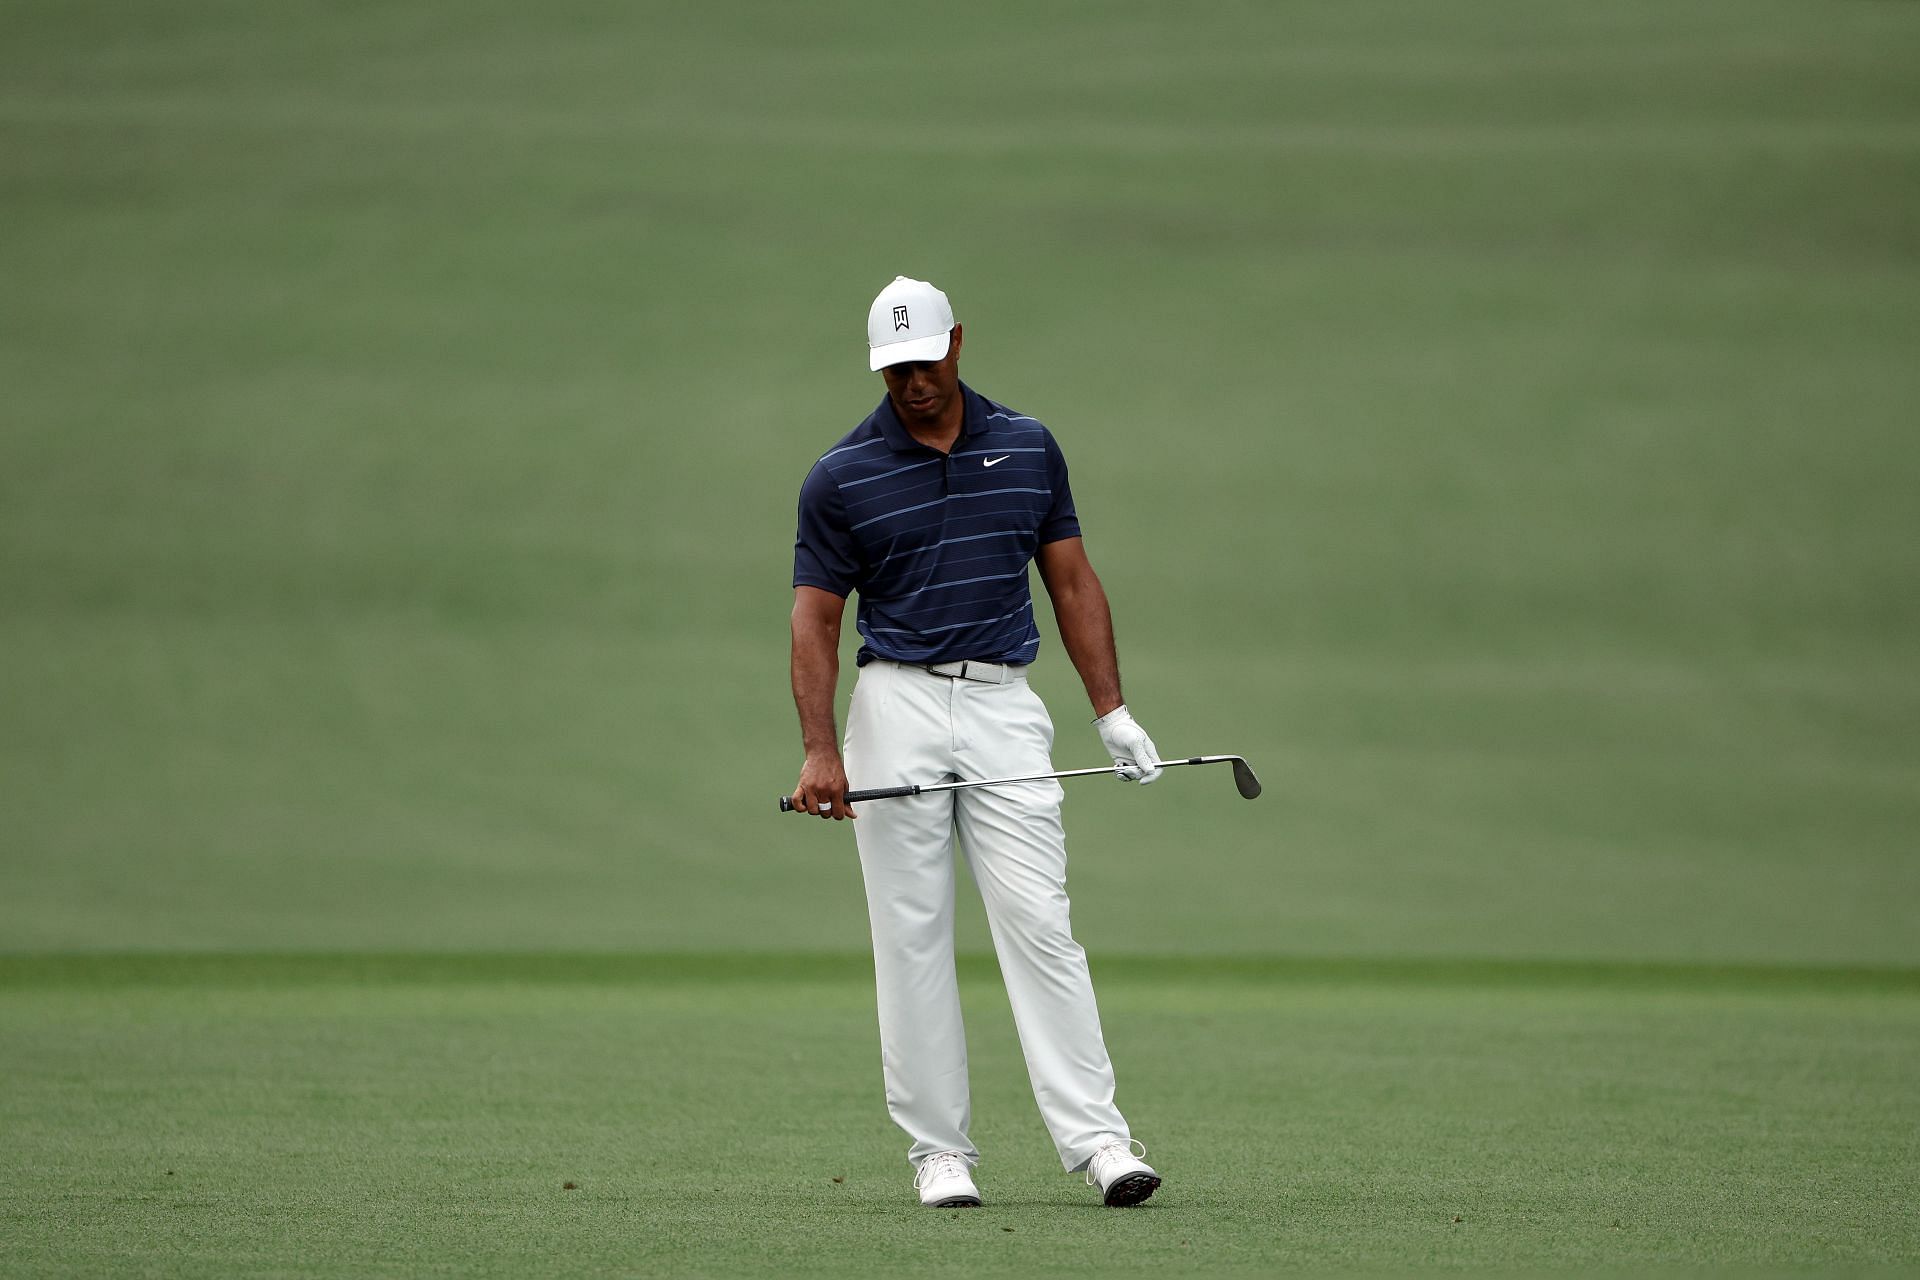 All eyes will be on Tiger Woods this weekend